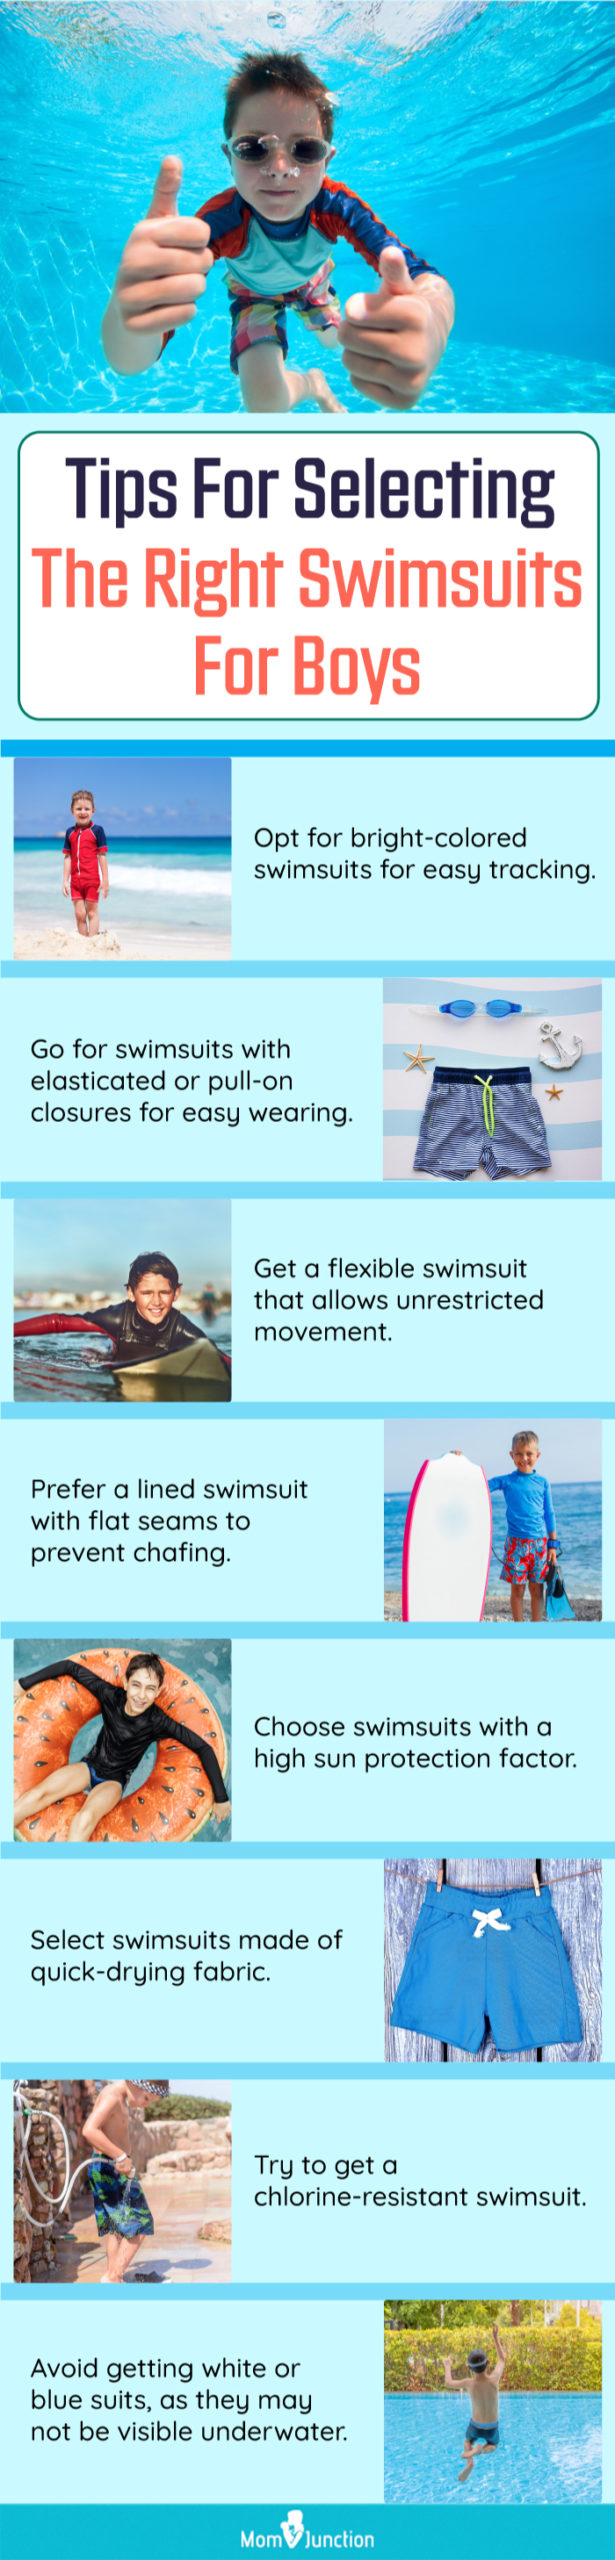 Tips For Selecting The Right Swimsuits For Boys (infographic)